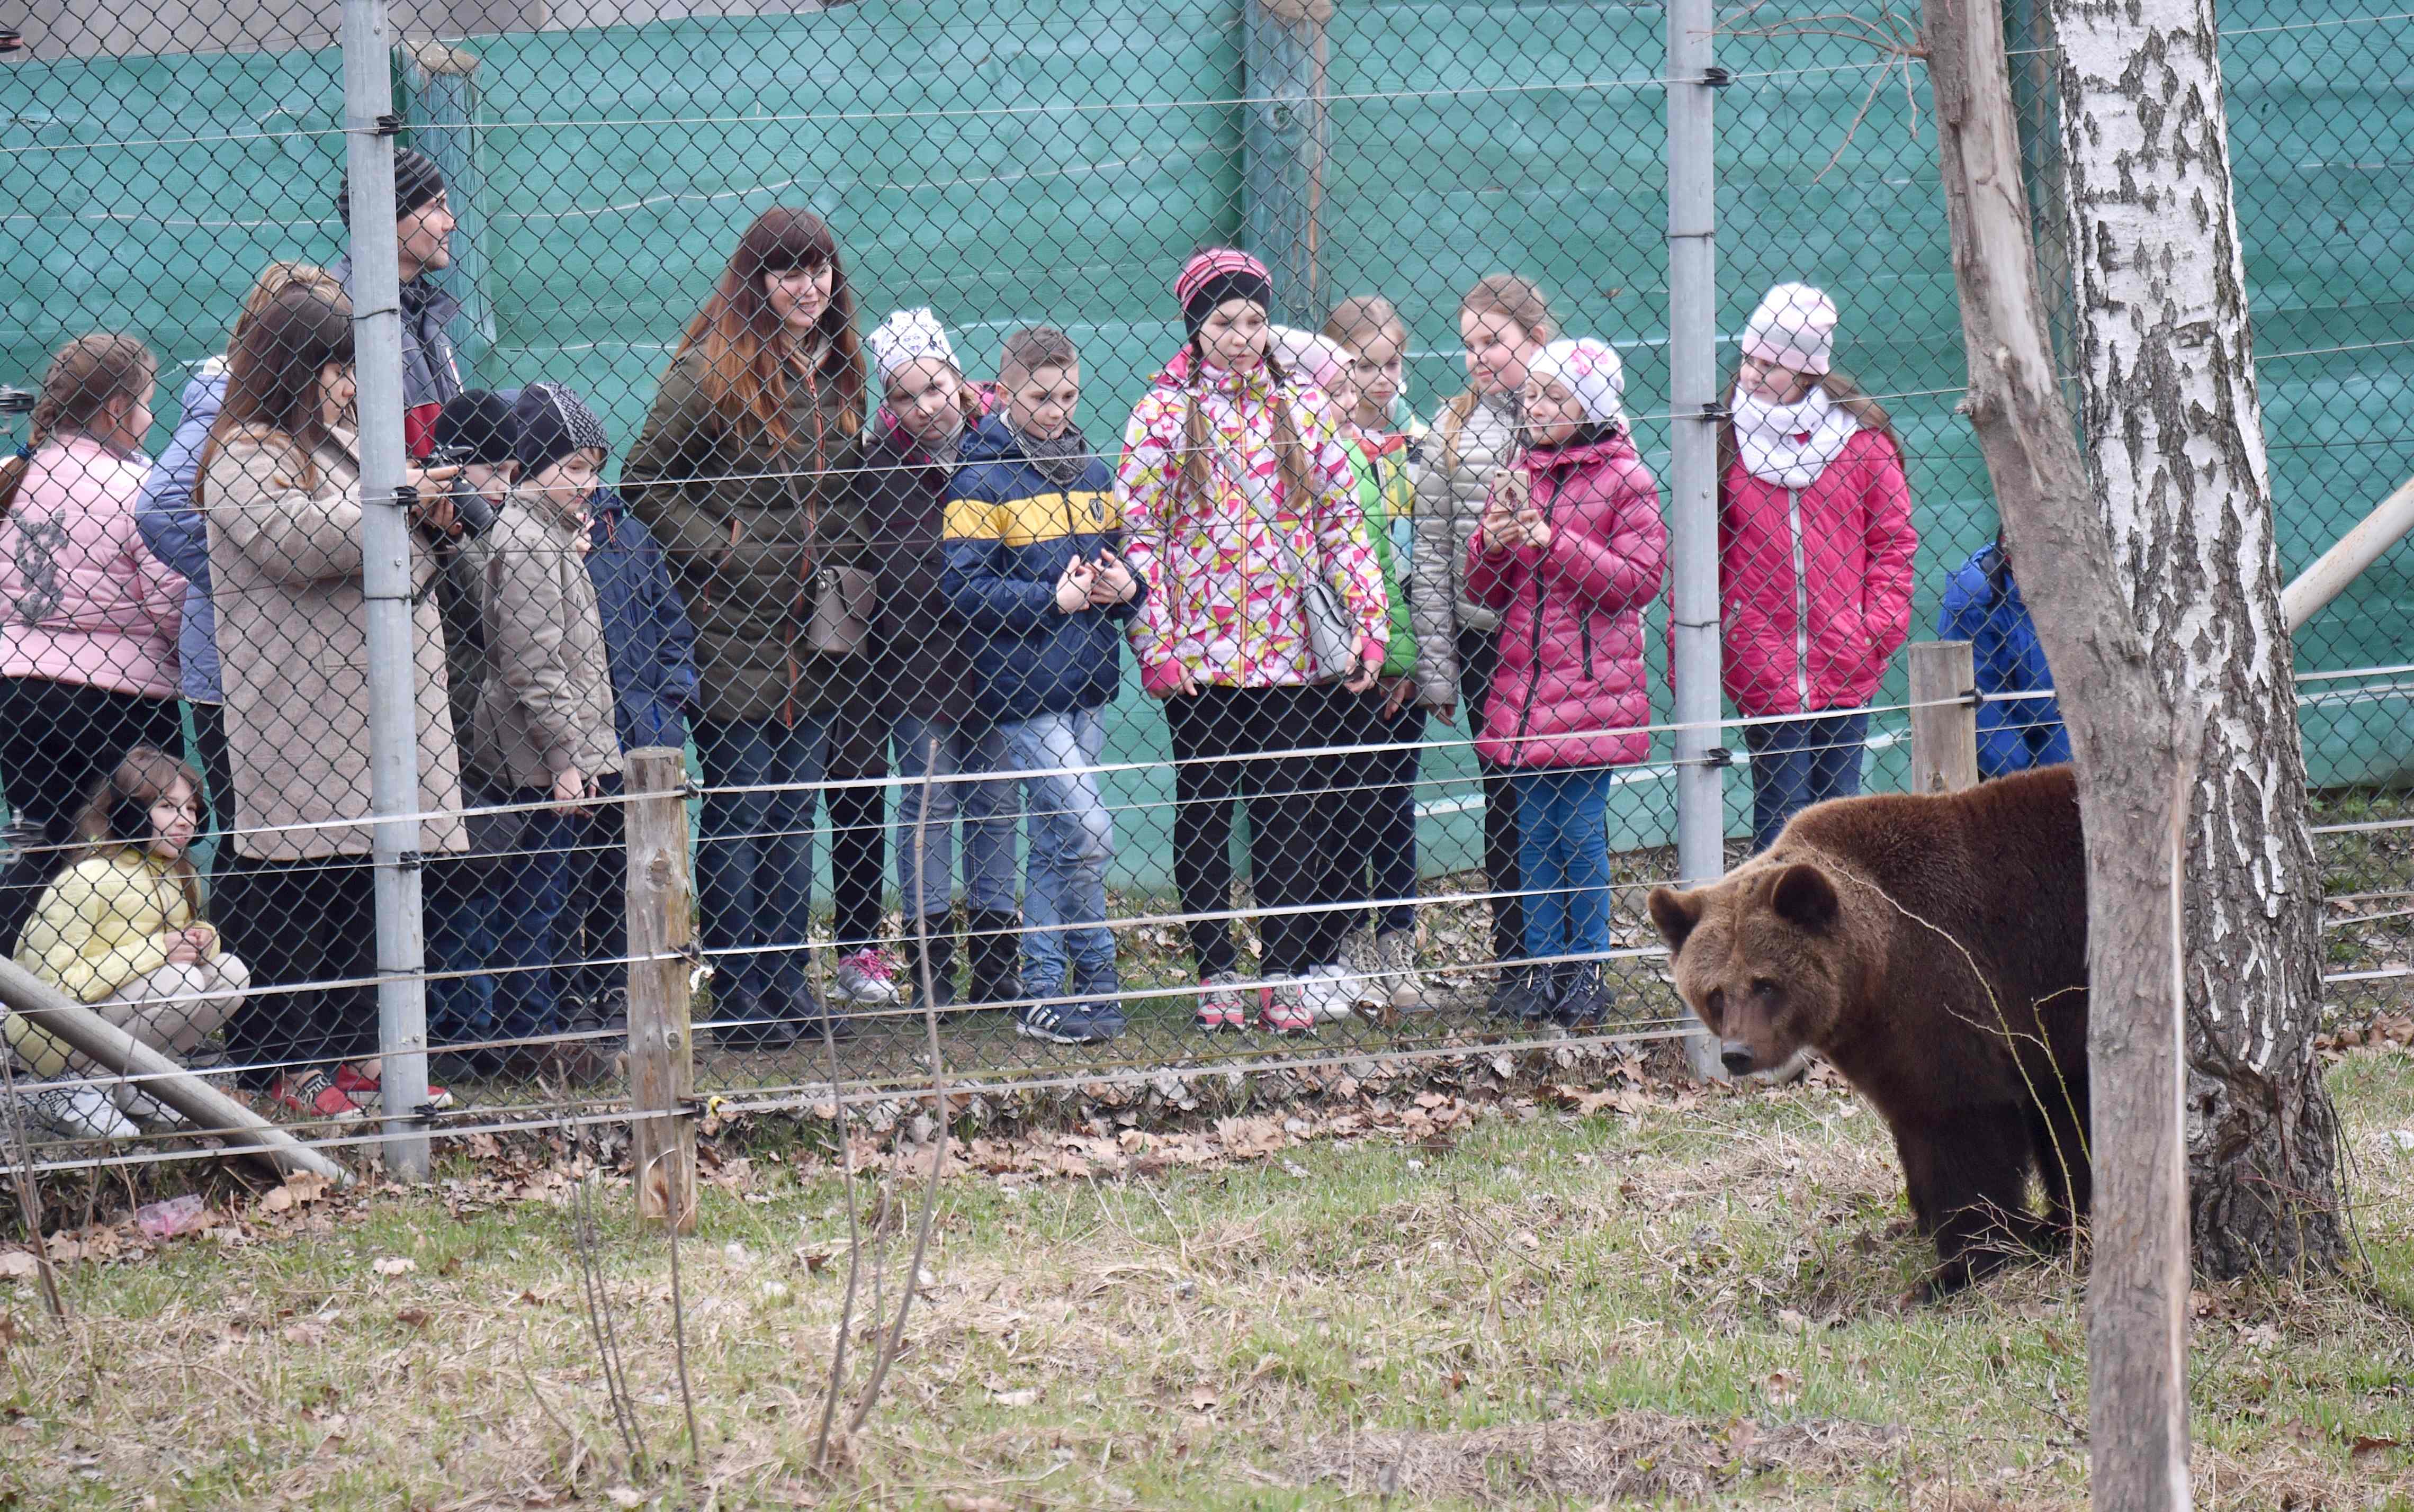 School children look at a bear as they visit a shelter for bears rescued from circuses and private restaurants of Ukraine, near Zhytomyr, some 150 km west of Kiev, on March 24, 2017. Tortured for years by human hands these mighty animals got a chance to start it all over again in a shelter near the city of Zhytomyr, in the northwest of the country. Opened in 2012 by international animal charity Four Paws, the rescue centre soon became one of the biggest sights of the region. / AFP PHOTO / Sergei SUPINSKY